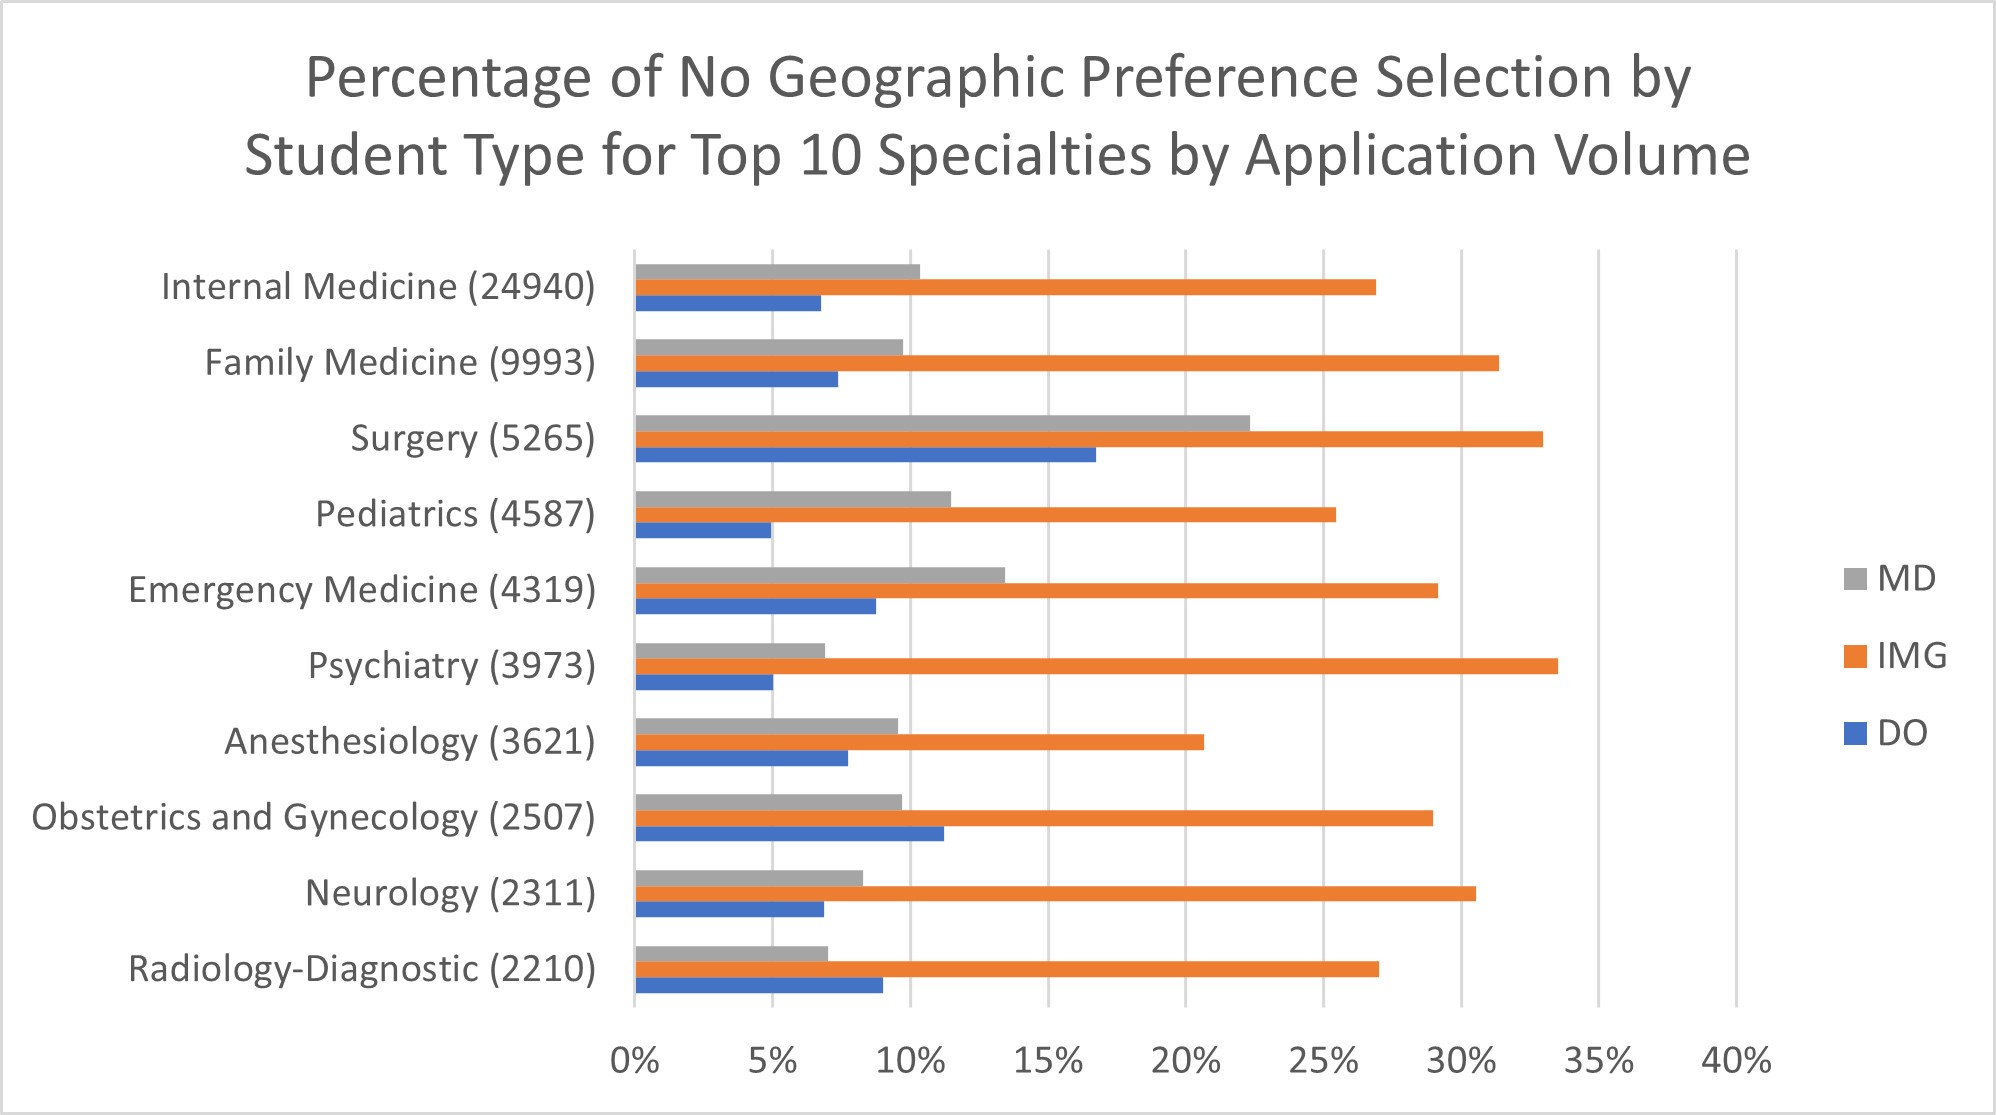 Stacked bar chart indicating the percentage of applications that indicated no geographic preference by student type for the top 10 speciatlies by application volume in the 2024 ERAS residency season. For 24,940 Internal Medicine applications, just over 10% of MD applications indicated no geographic preference; for International Medical Graduates—IMGs—it was over 25%, and for DOs it was less than 10%. For 9,993 Family Medicine applications, less than 10% of MD applications indicated no preference; for IMGs it was over 30% and for DOs it was less than 10%. For 5,265 Surgery applications, more than 20% of MD applications indicated no geographic preference, with more than 30% of IMGs and just over 15% of DOs. For 4,587 Pediatrics applications, just over 10% of MD applications indicated no geographic preference; for IMGs it was over 25%, and for DOs it was about 5%. In 4,319 Emergency Medicine applications, less than 15% of MD applications indicated no geographic preference, nearly 30% of IMGs, and less than 10% of DOs. In the 3,973 Psychiatry applications, over 5% of MD applications indicated no geographic preference, as did nearly 35% of IMGs, and about 5% of DOs. In 3,621 Anesthesiology applications less than 10% of MD applications indicated no geographic preference, as did over 20% of IMGs, and less than 10% of DOs. Among 2,507 Obstetrics and Gynecology applications, less than 10% of MD applications indicated no geographic preference, less than 30% of IMGs, and over 10% of DOs. For the 2,311 Neurology applications, less than 10% of MD applications indicated no geographic preference, more than 30% of IMGS, and more than 5% of DOs. For the 2,210 Diagnostic Radiology applications, over 5% of MD applications indicated no geographic preference, more than 25% of IMGs, and less than 10% of DOs.